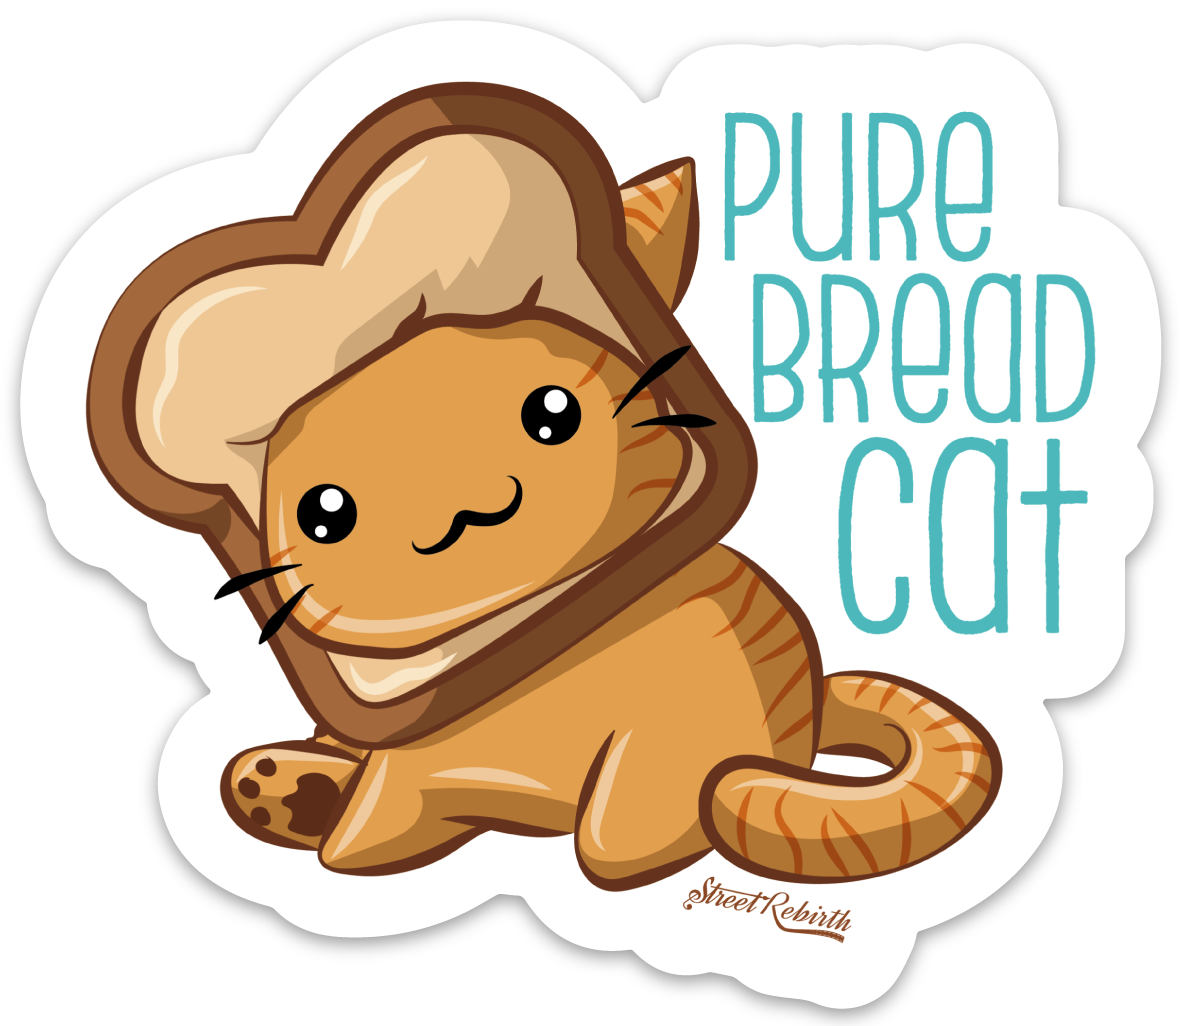 Pure Bread Cat PUN STICKER – ONE 4 INCH WATER PROOF VINYL STICKER – FOR HYDRO FLASK, SKATEBOARD, LAPTOP, PLANNER, CAR, COLLECTING, GIFTING